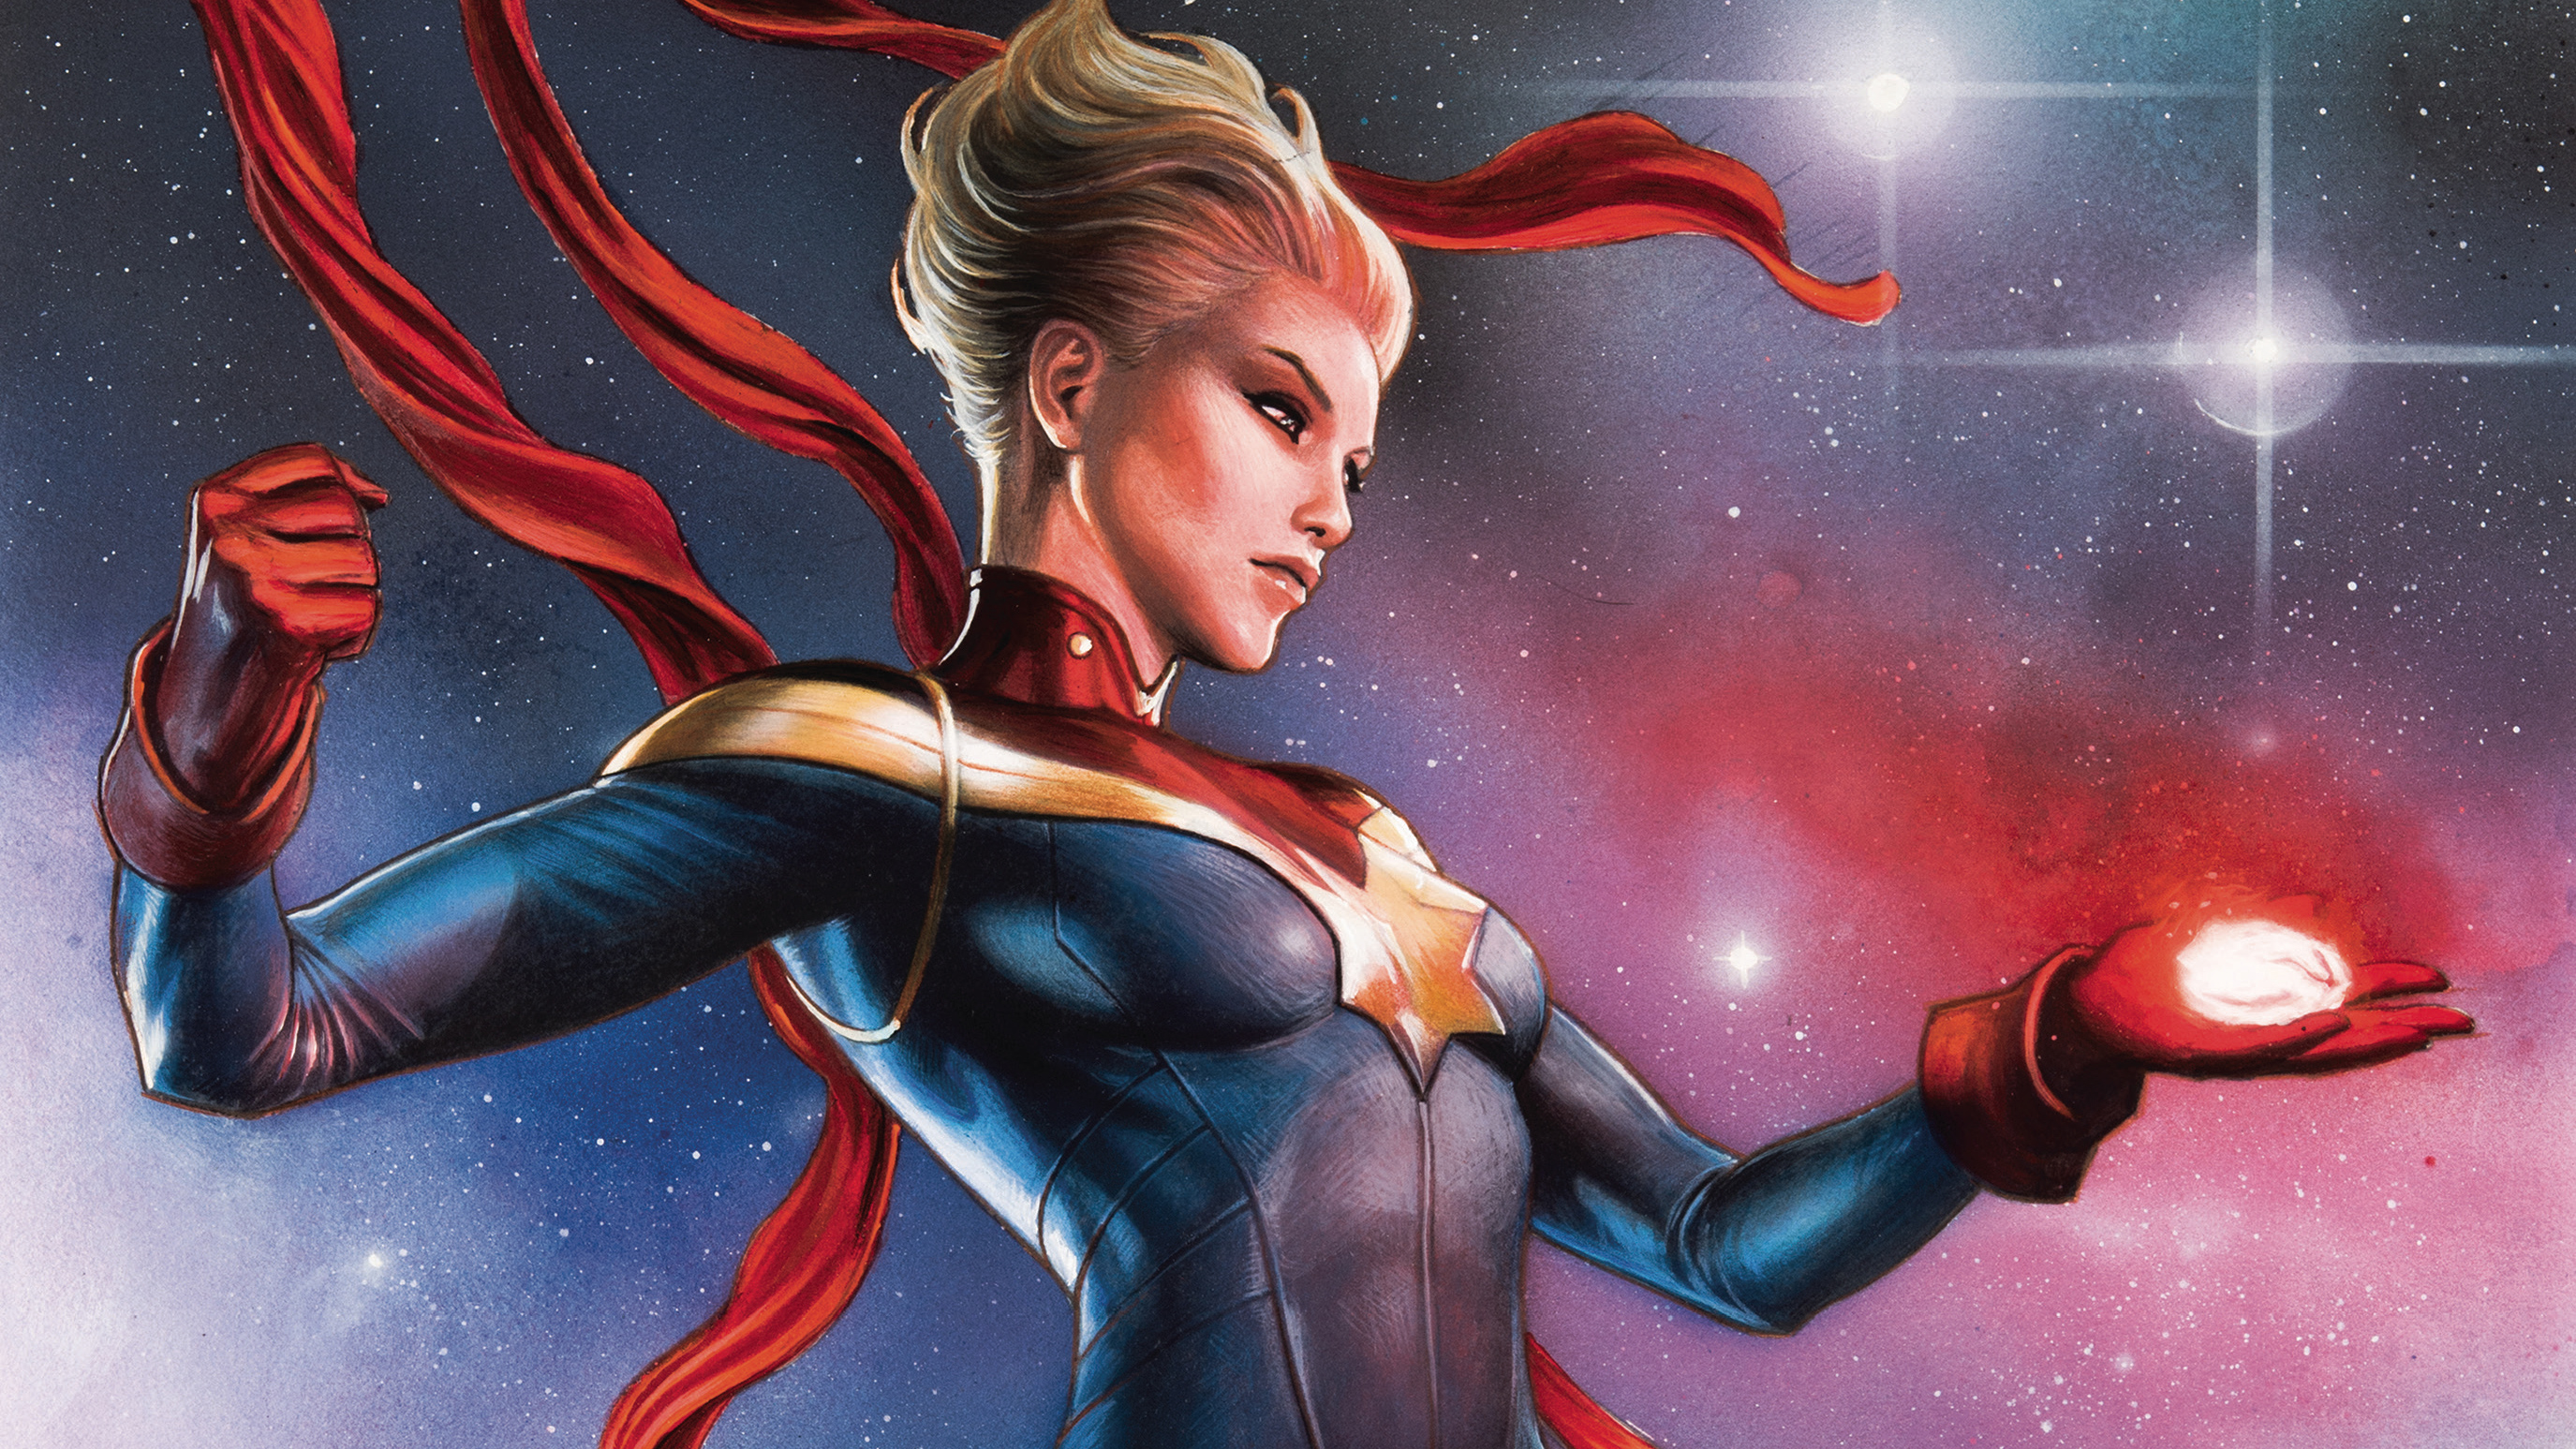 Captain Marvel Comic Book Art, HD Superheroes, 4k Wallpapers, Images,  Backgrounds, Photos and Pictures